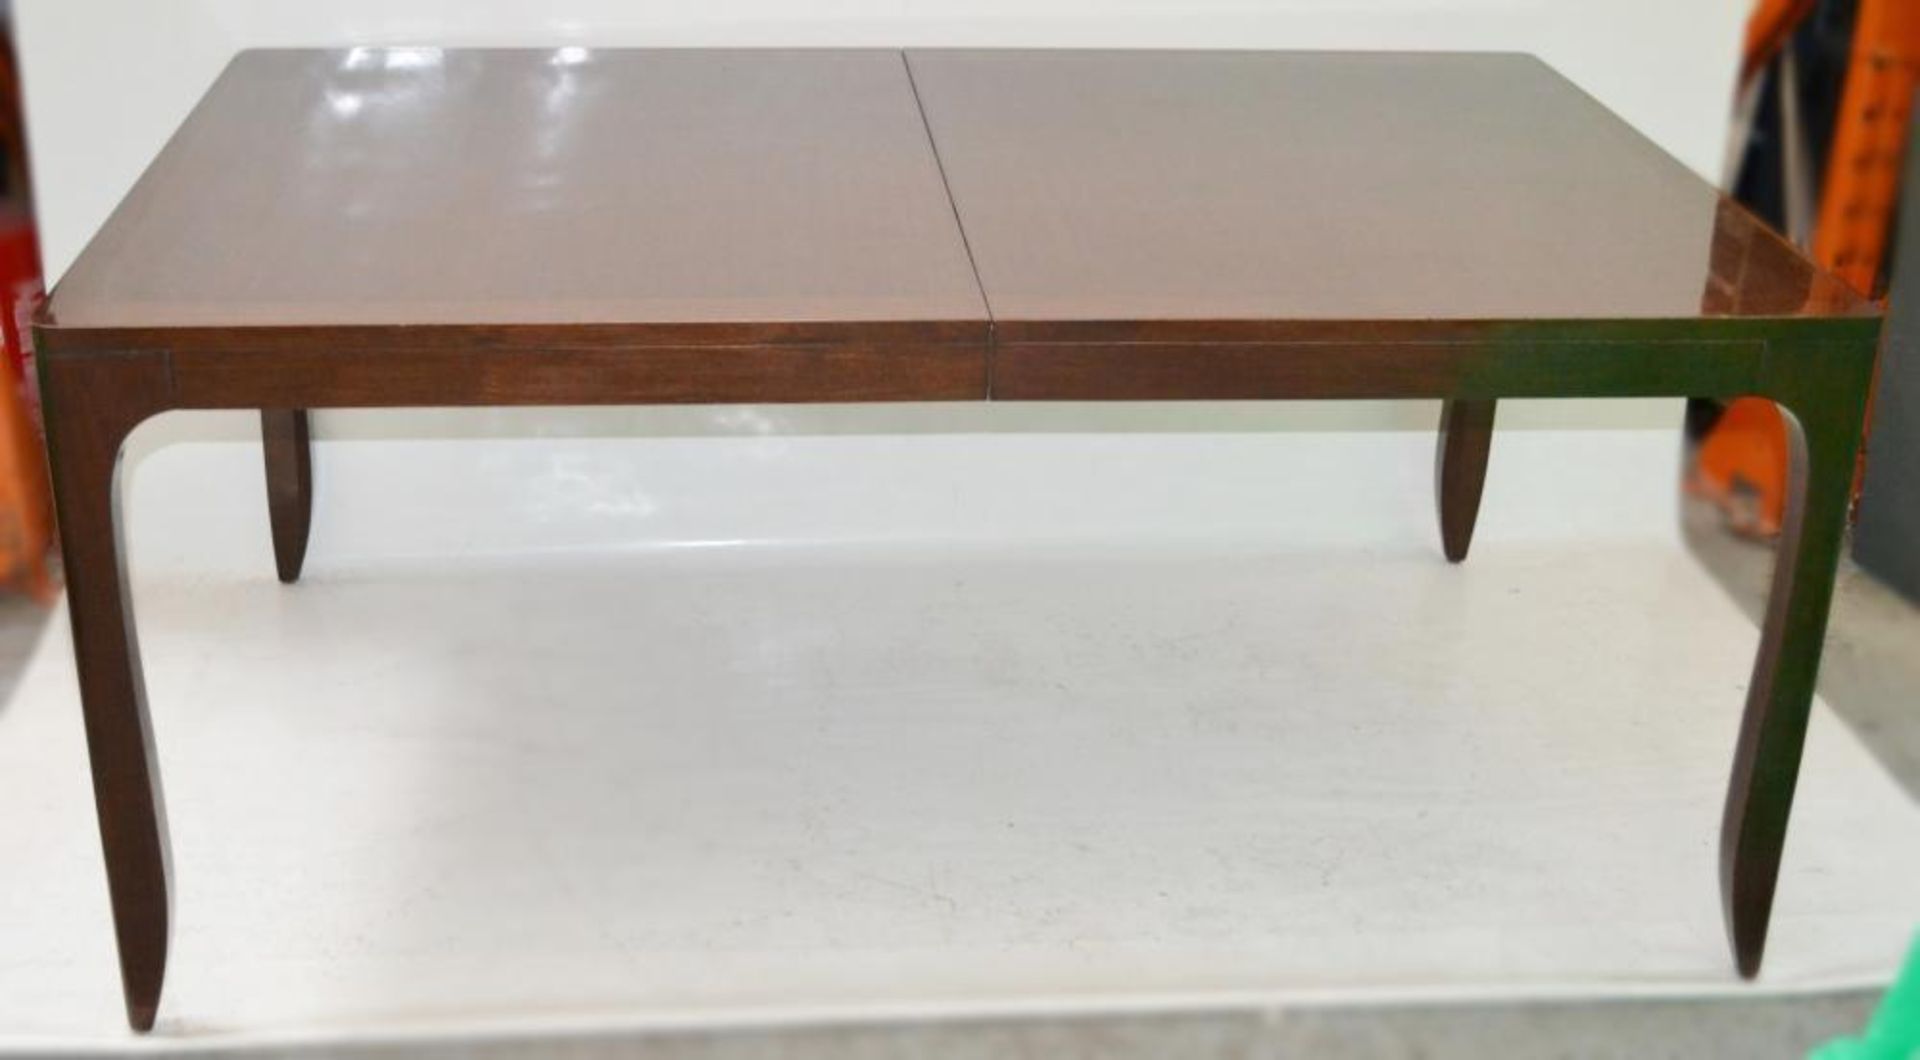 1 x BARBARA BARRY "Perfect Parsons" Dining Table In Dark Walnut - Includes Extensions Leaves - 2.8 M - Image 13 of 17